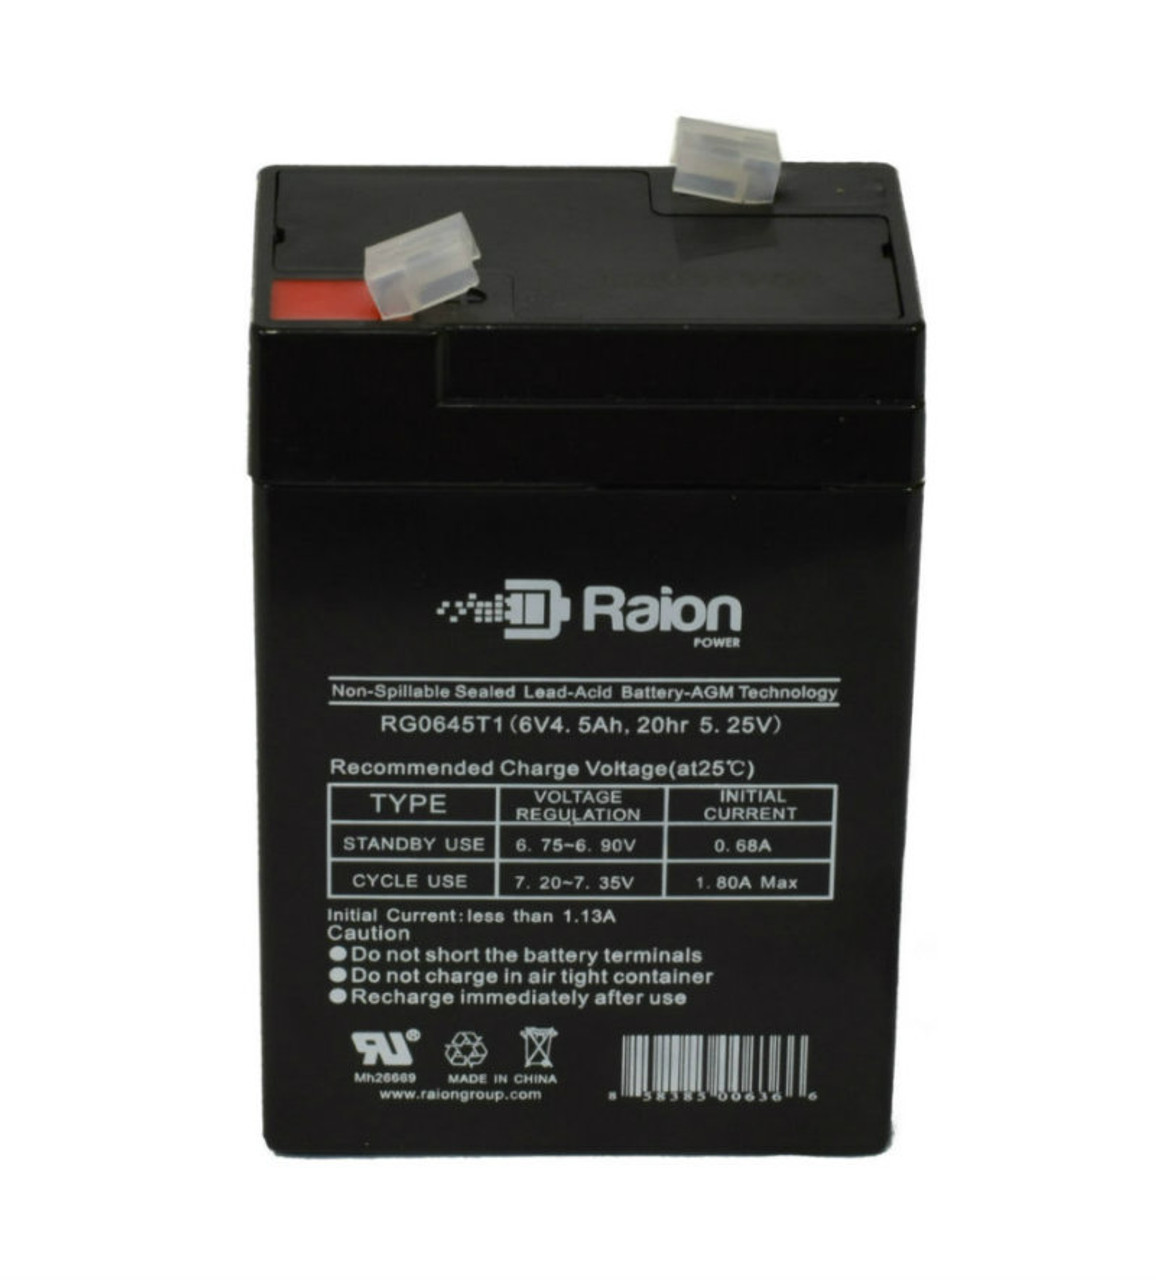 Raion Power RG0645T1 Replacement Battery Cartridge for Starlight SA6-4.5